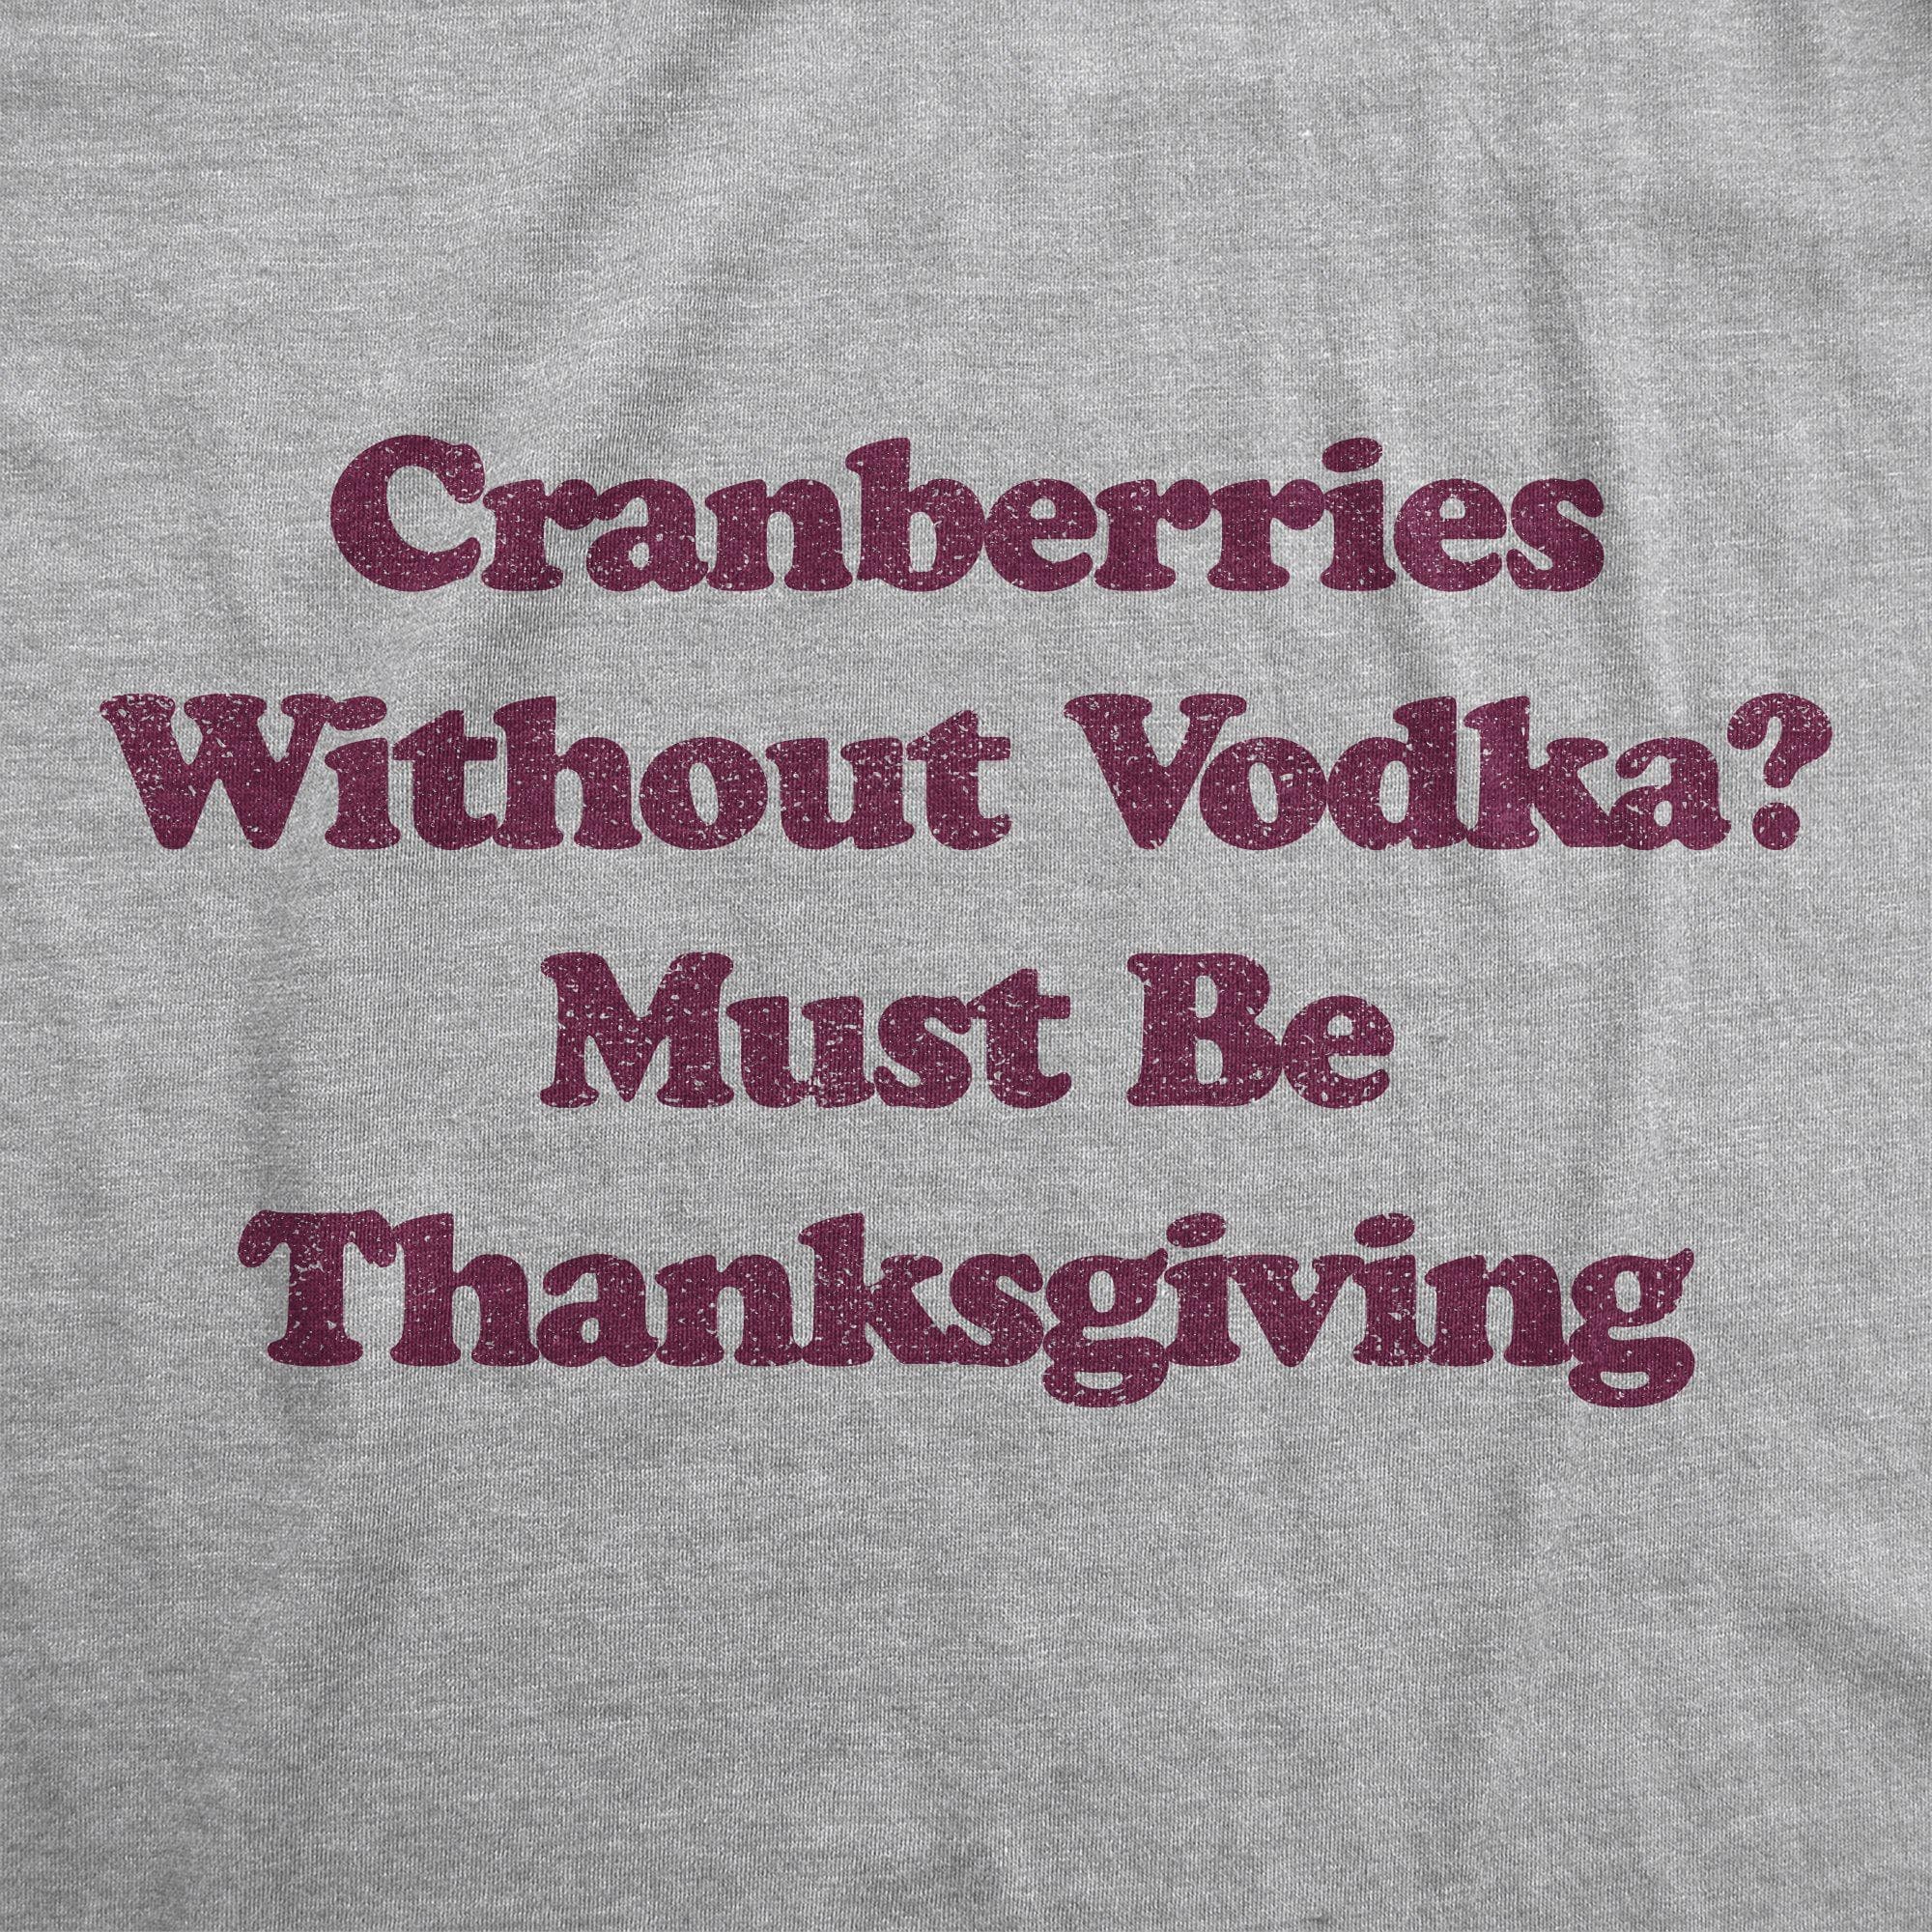 Cranberries Without Vodka? Must Be Thanksgiving Men's Tshirt - Crazy Dog T-Shirts